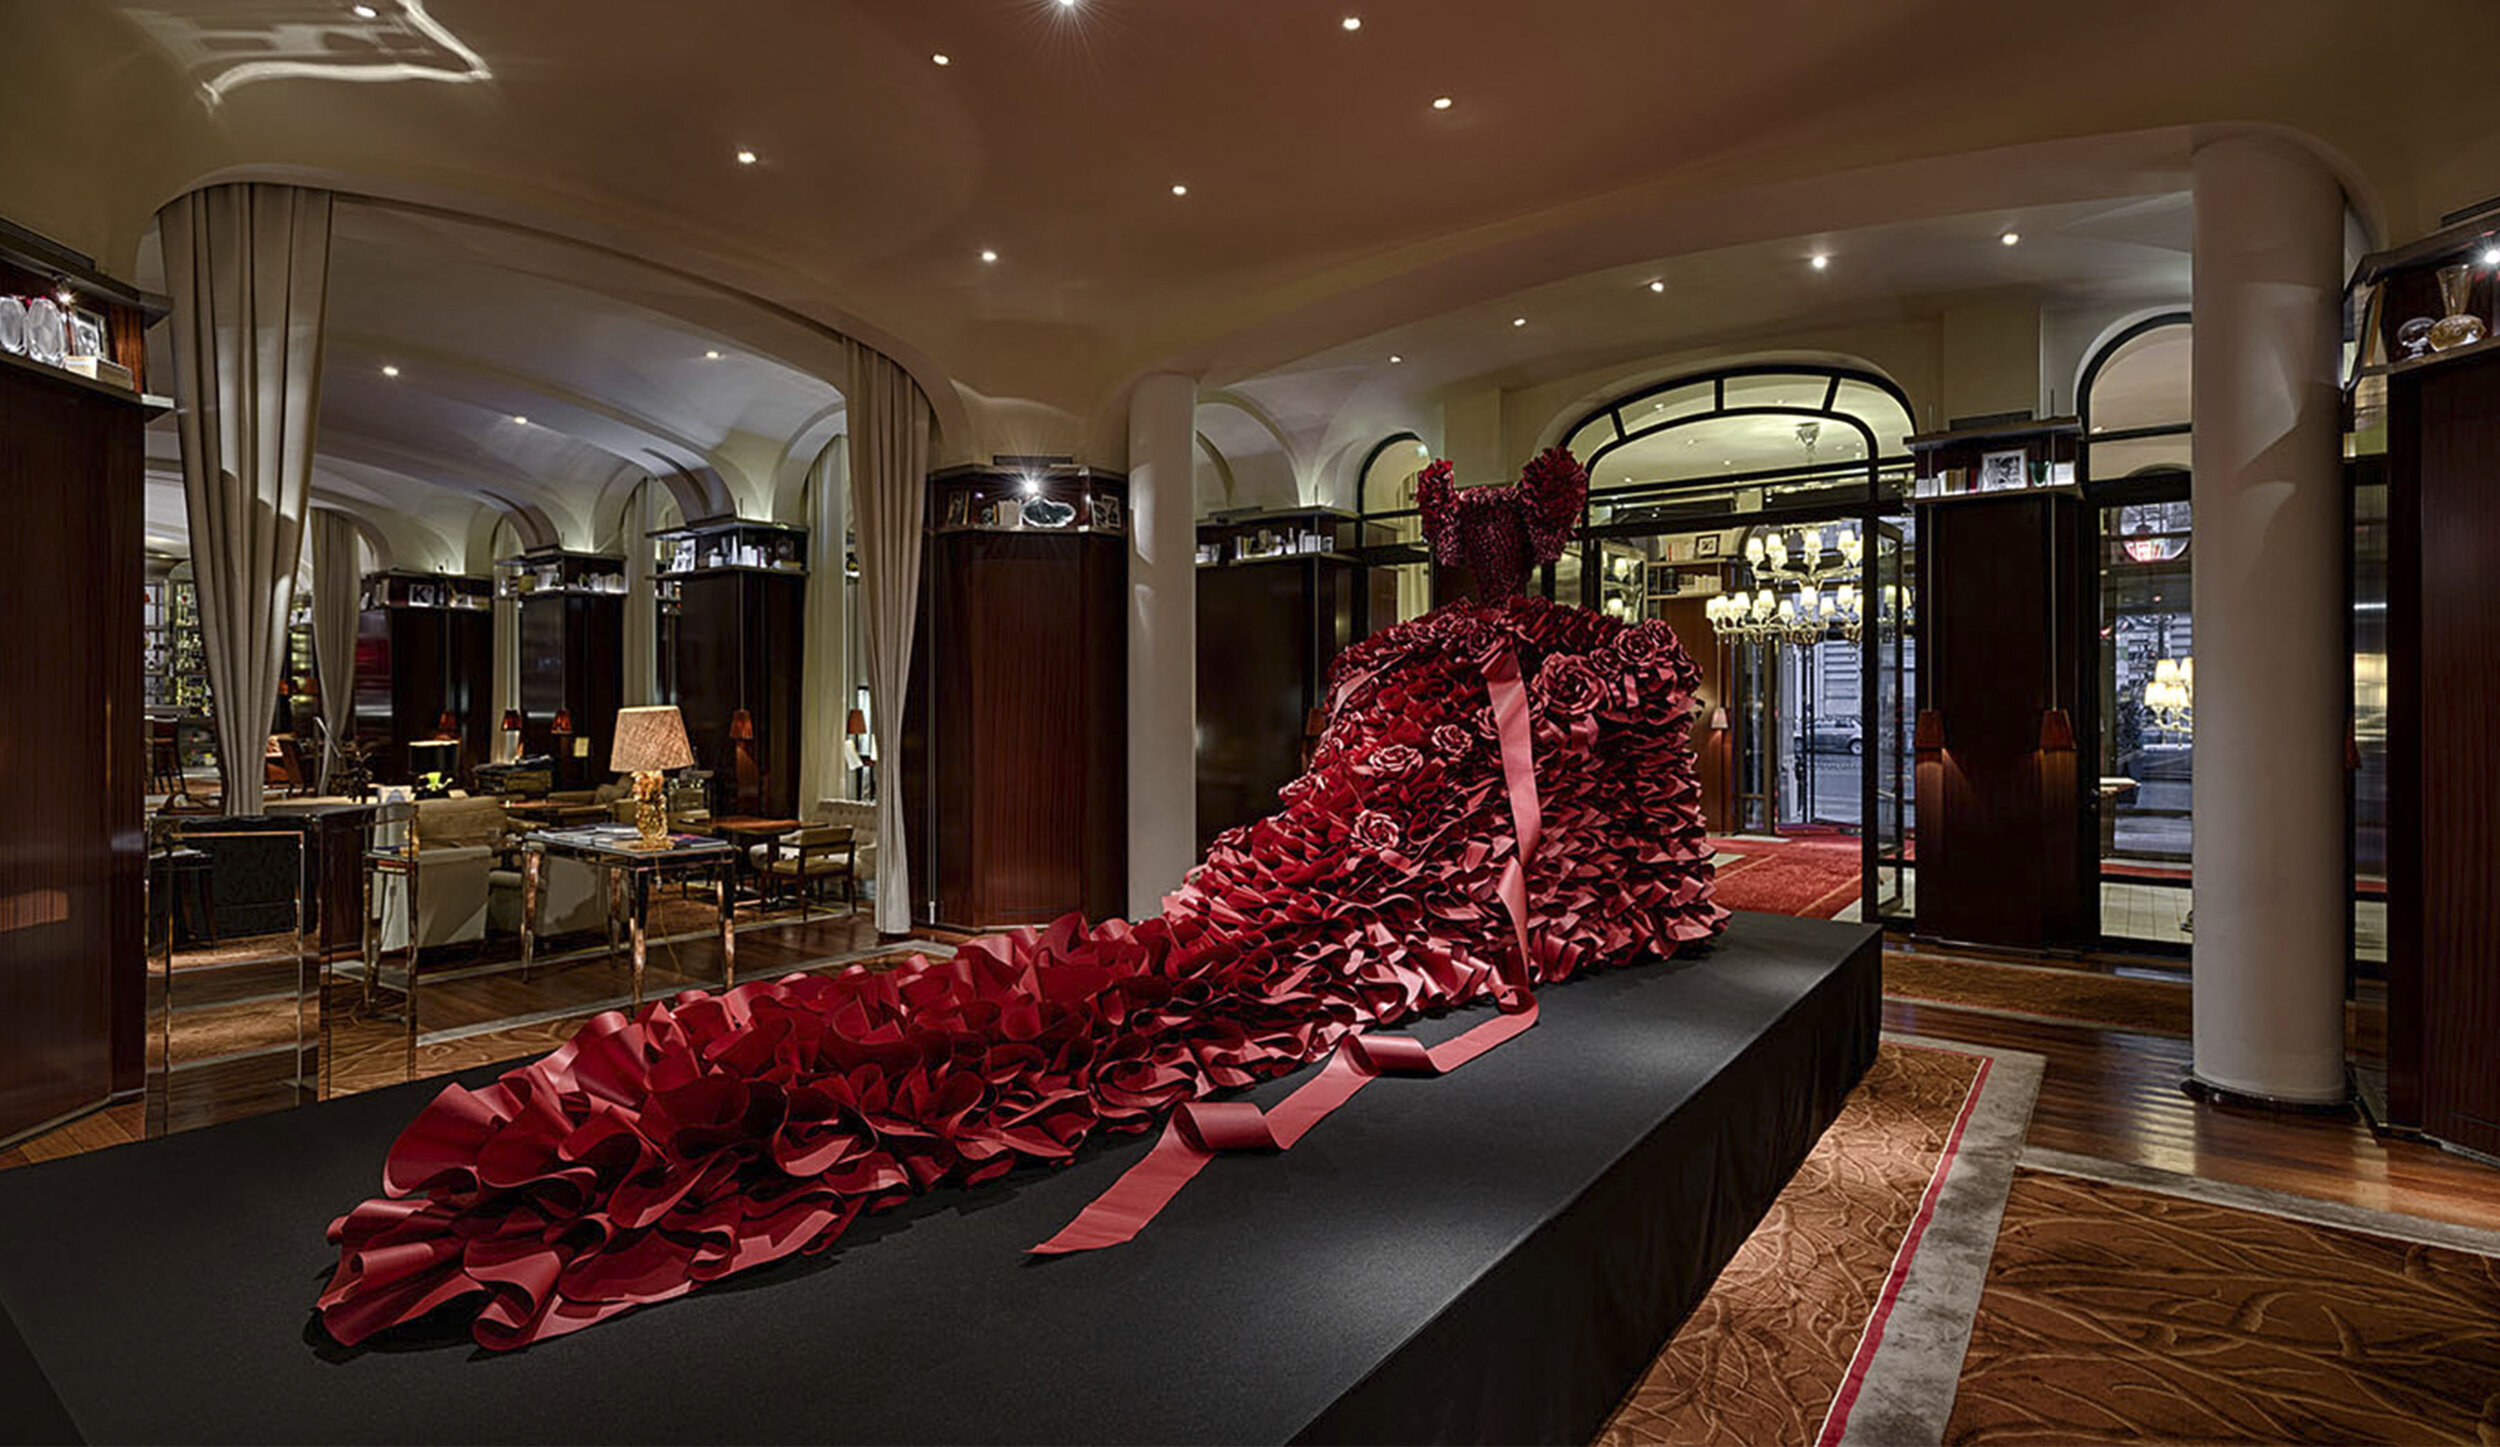 le-royal-monceau-zoebradley-couture-paperdress-red-roses-paperflowers-art-fashion-design2.jpg